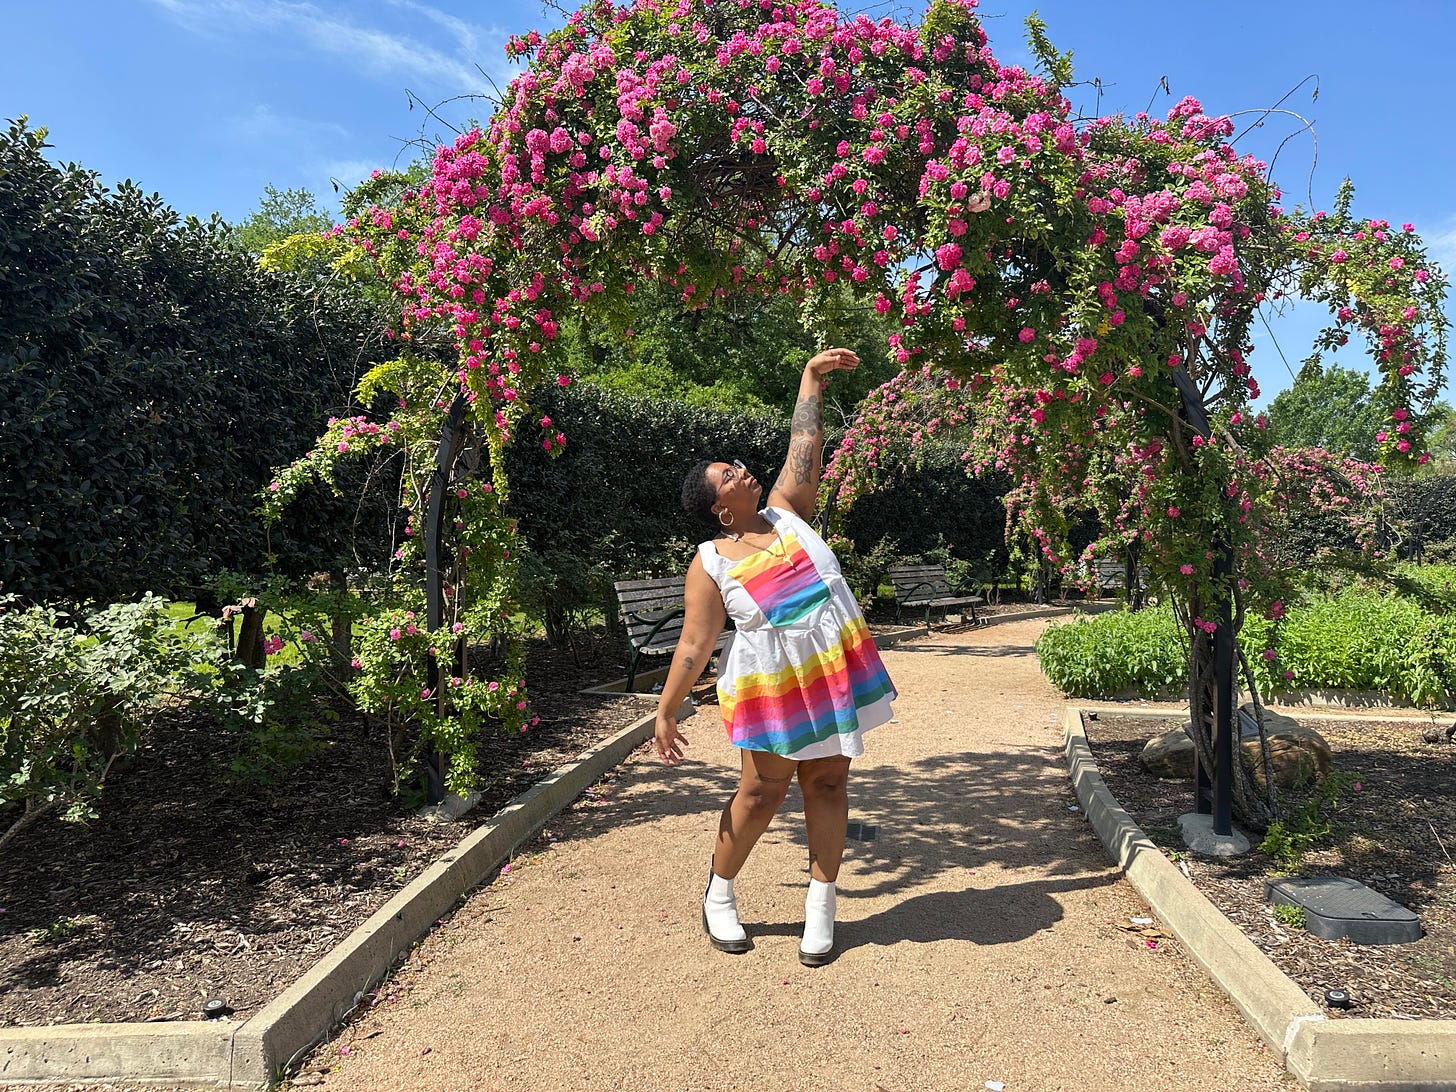 danielle standing in a garden wearing a rainbow dress she made and white high heel boots